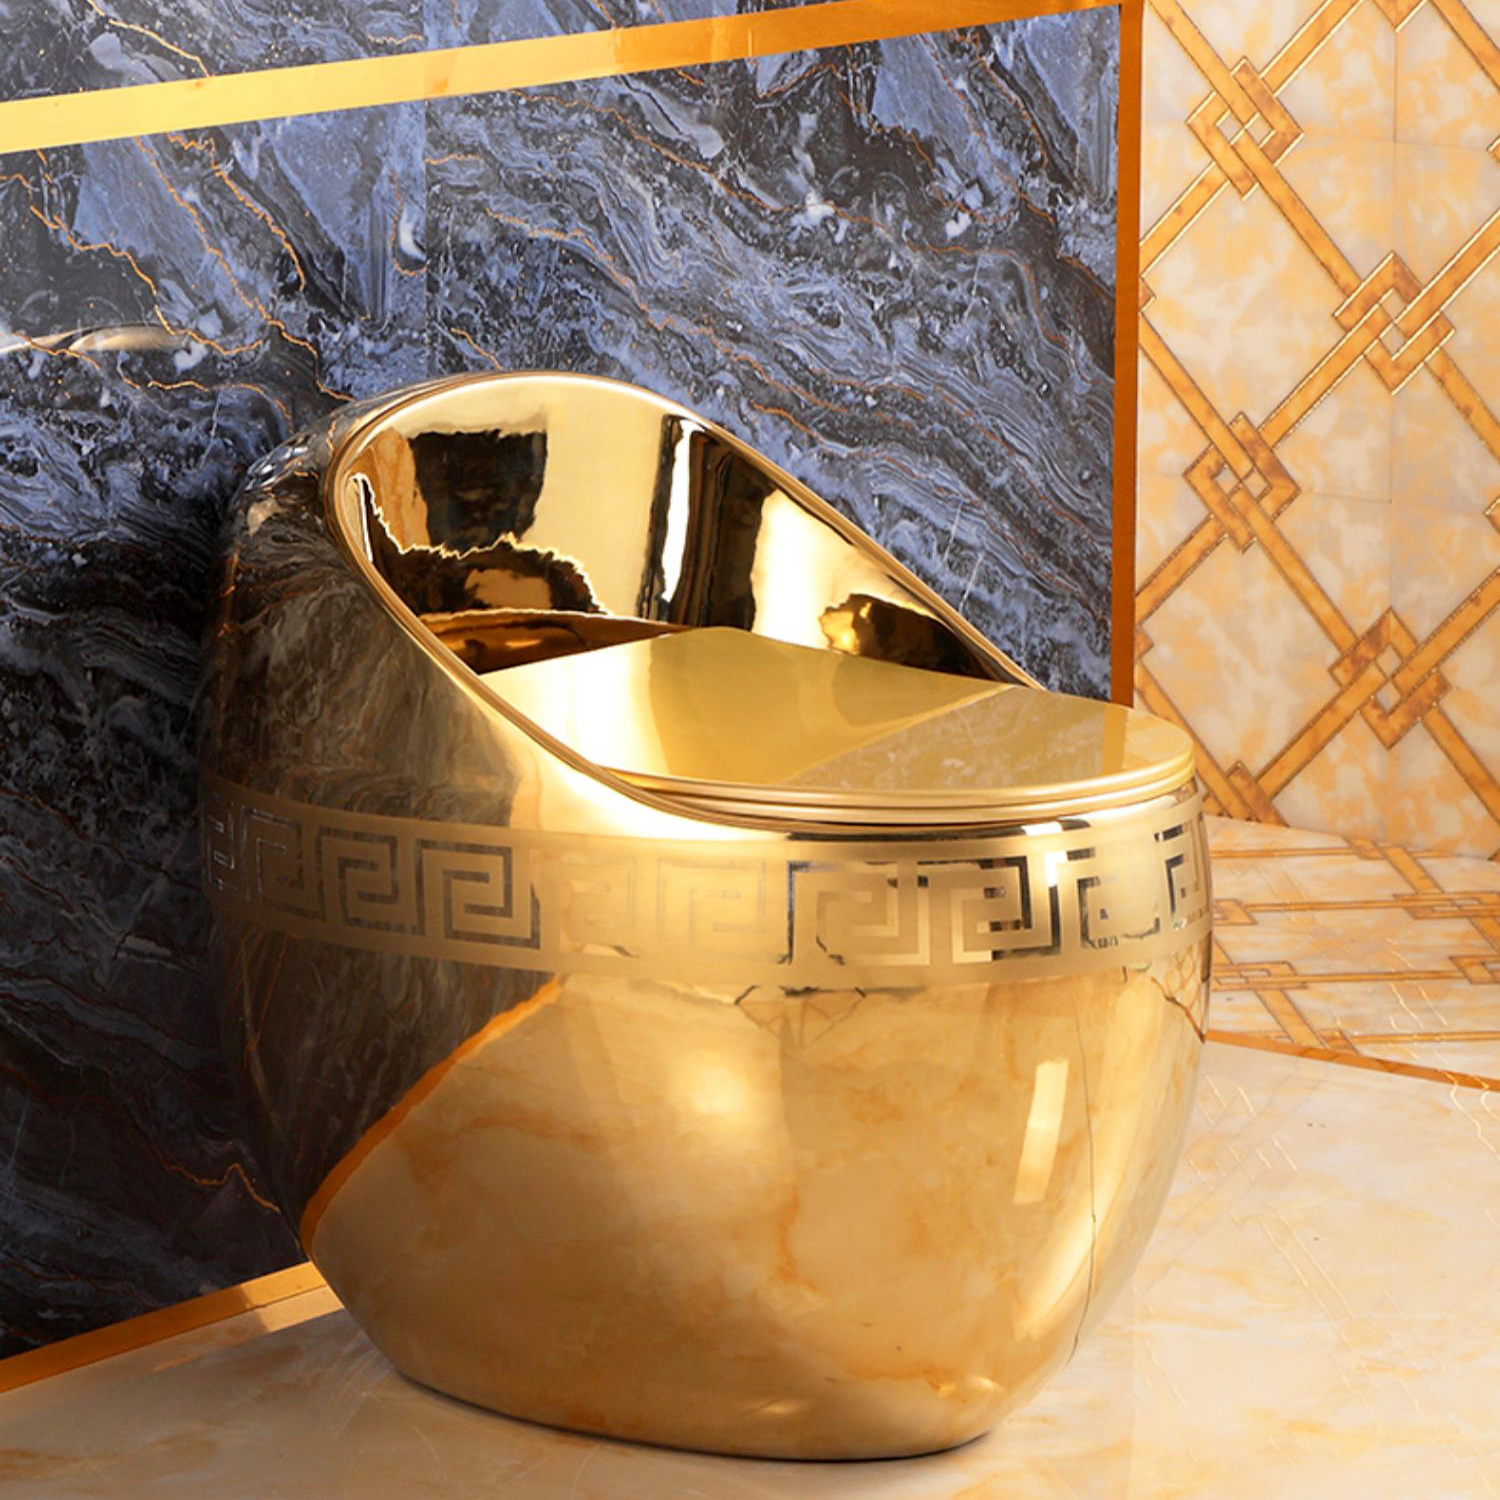 NEW, UNIQUE DESIGN!! Oval Shaped Gold Toilet With Ultra-Low Profile Water Tank Gold Toilets